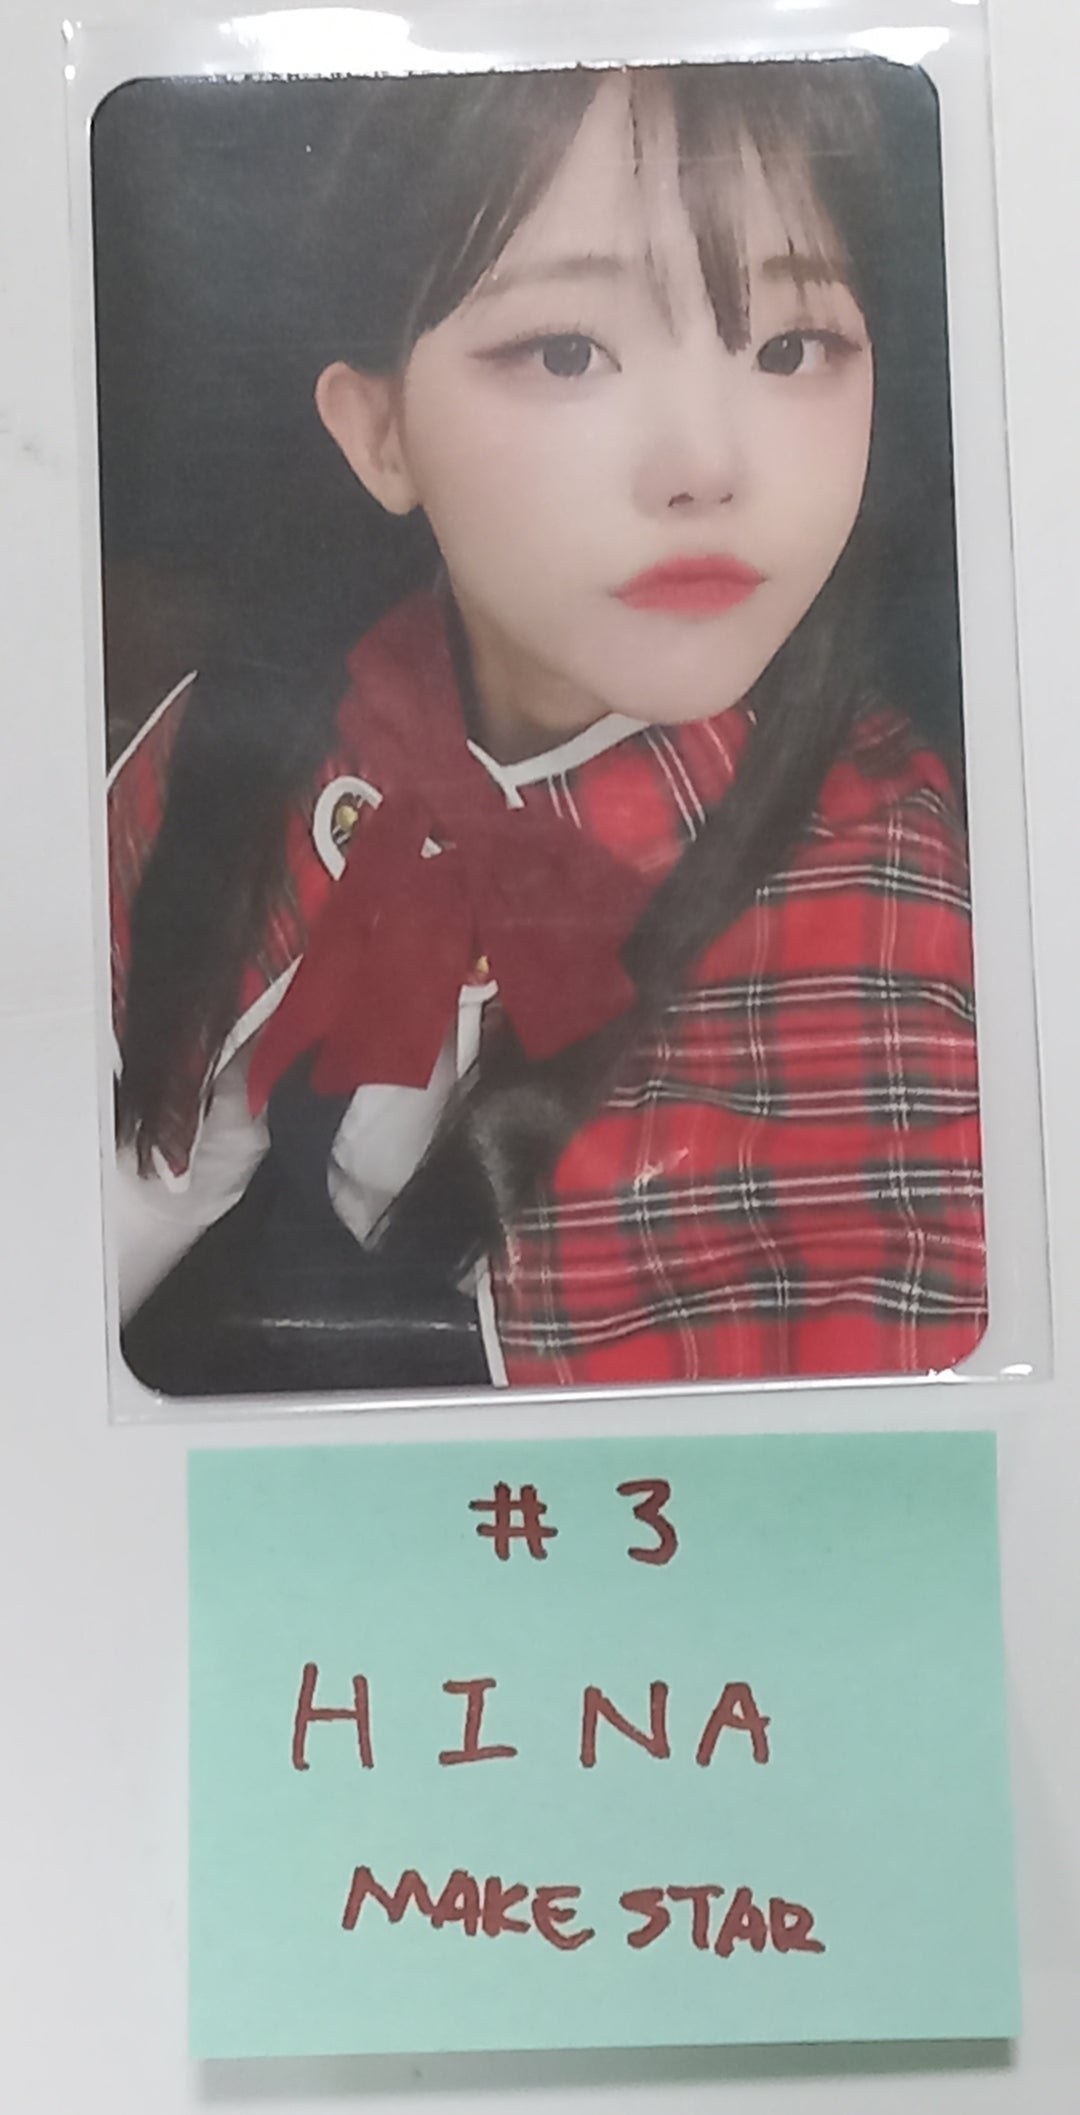 QWER "Harmony from Discord" - Makestar Fansign Event Photocard, 2 Cut Photo Round 3 [23.11.16]